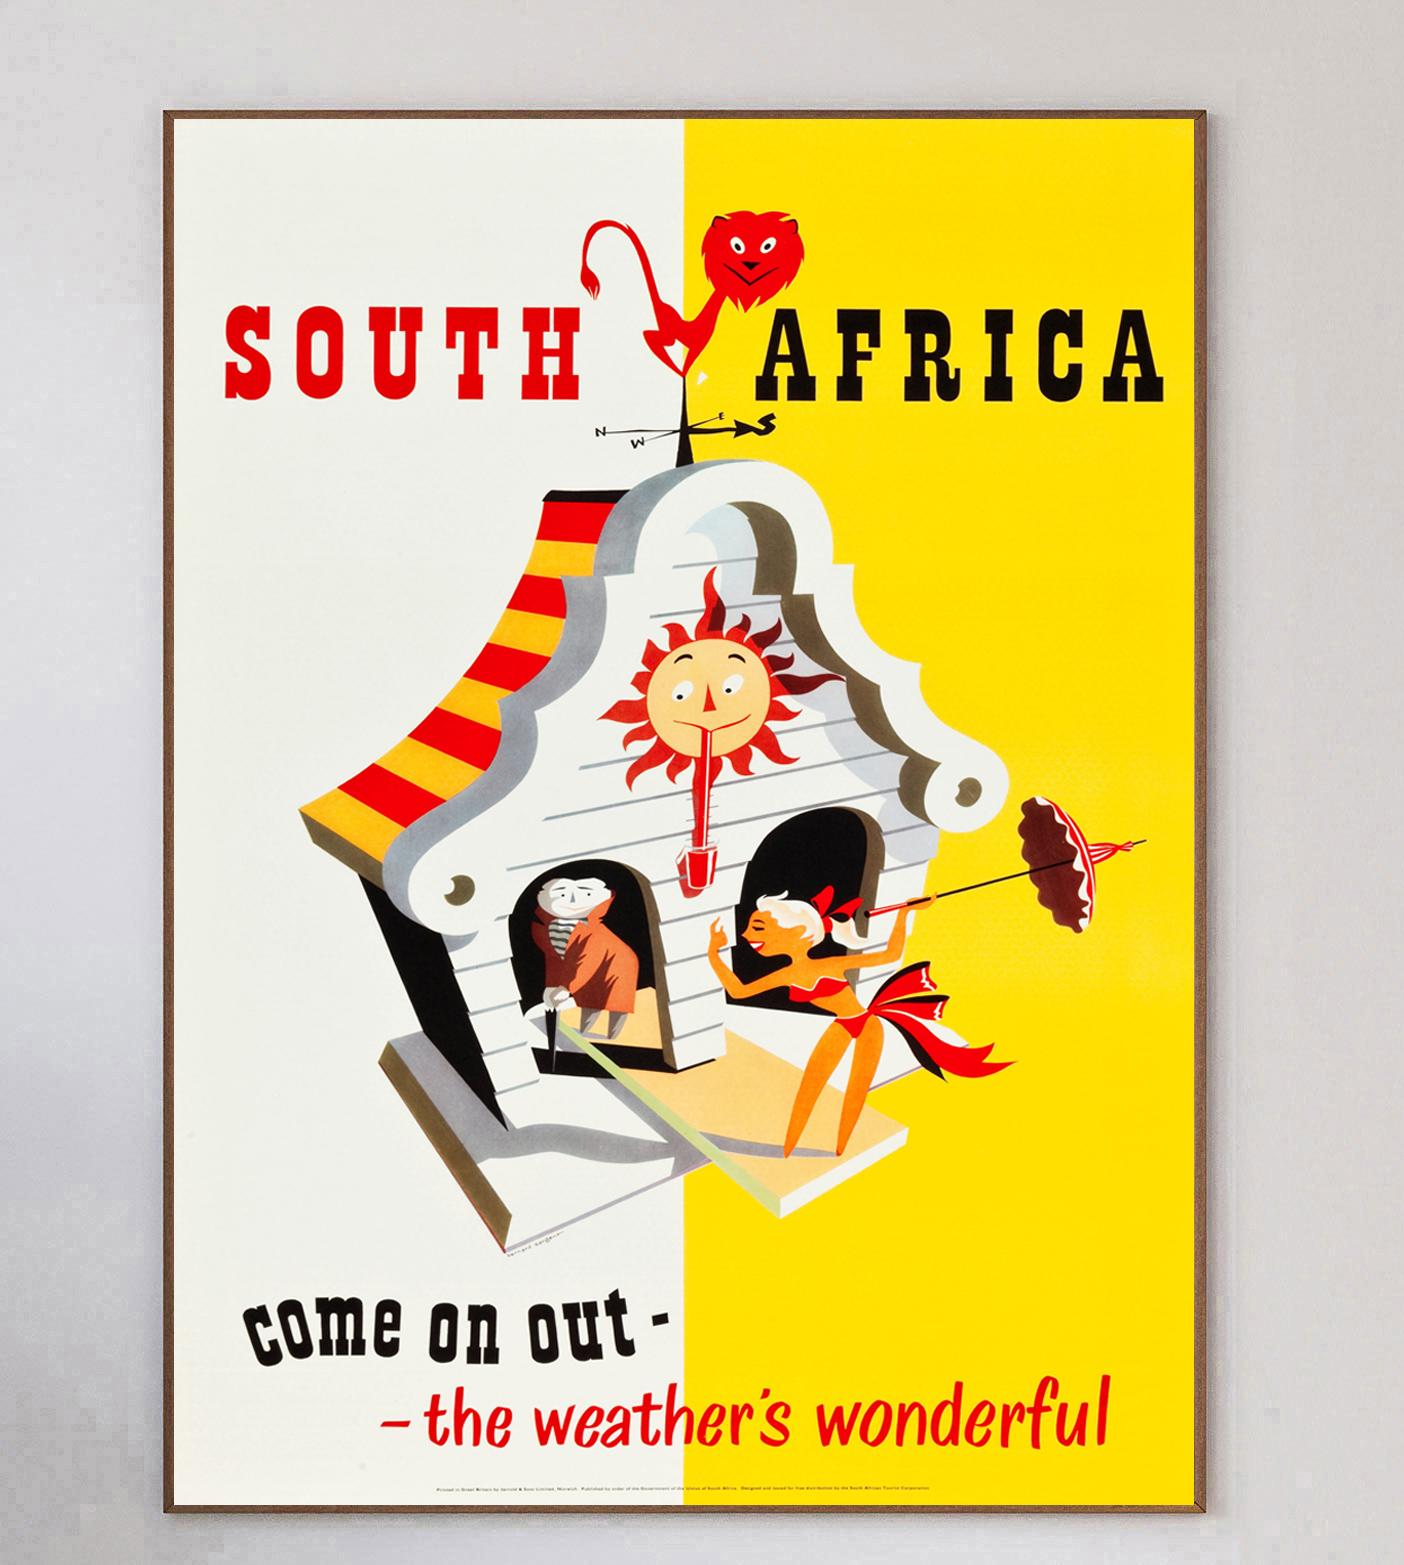 Gorgeous poster produced by the South Africa tourism board in 1955 to promote tourists & visitors to 